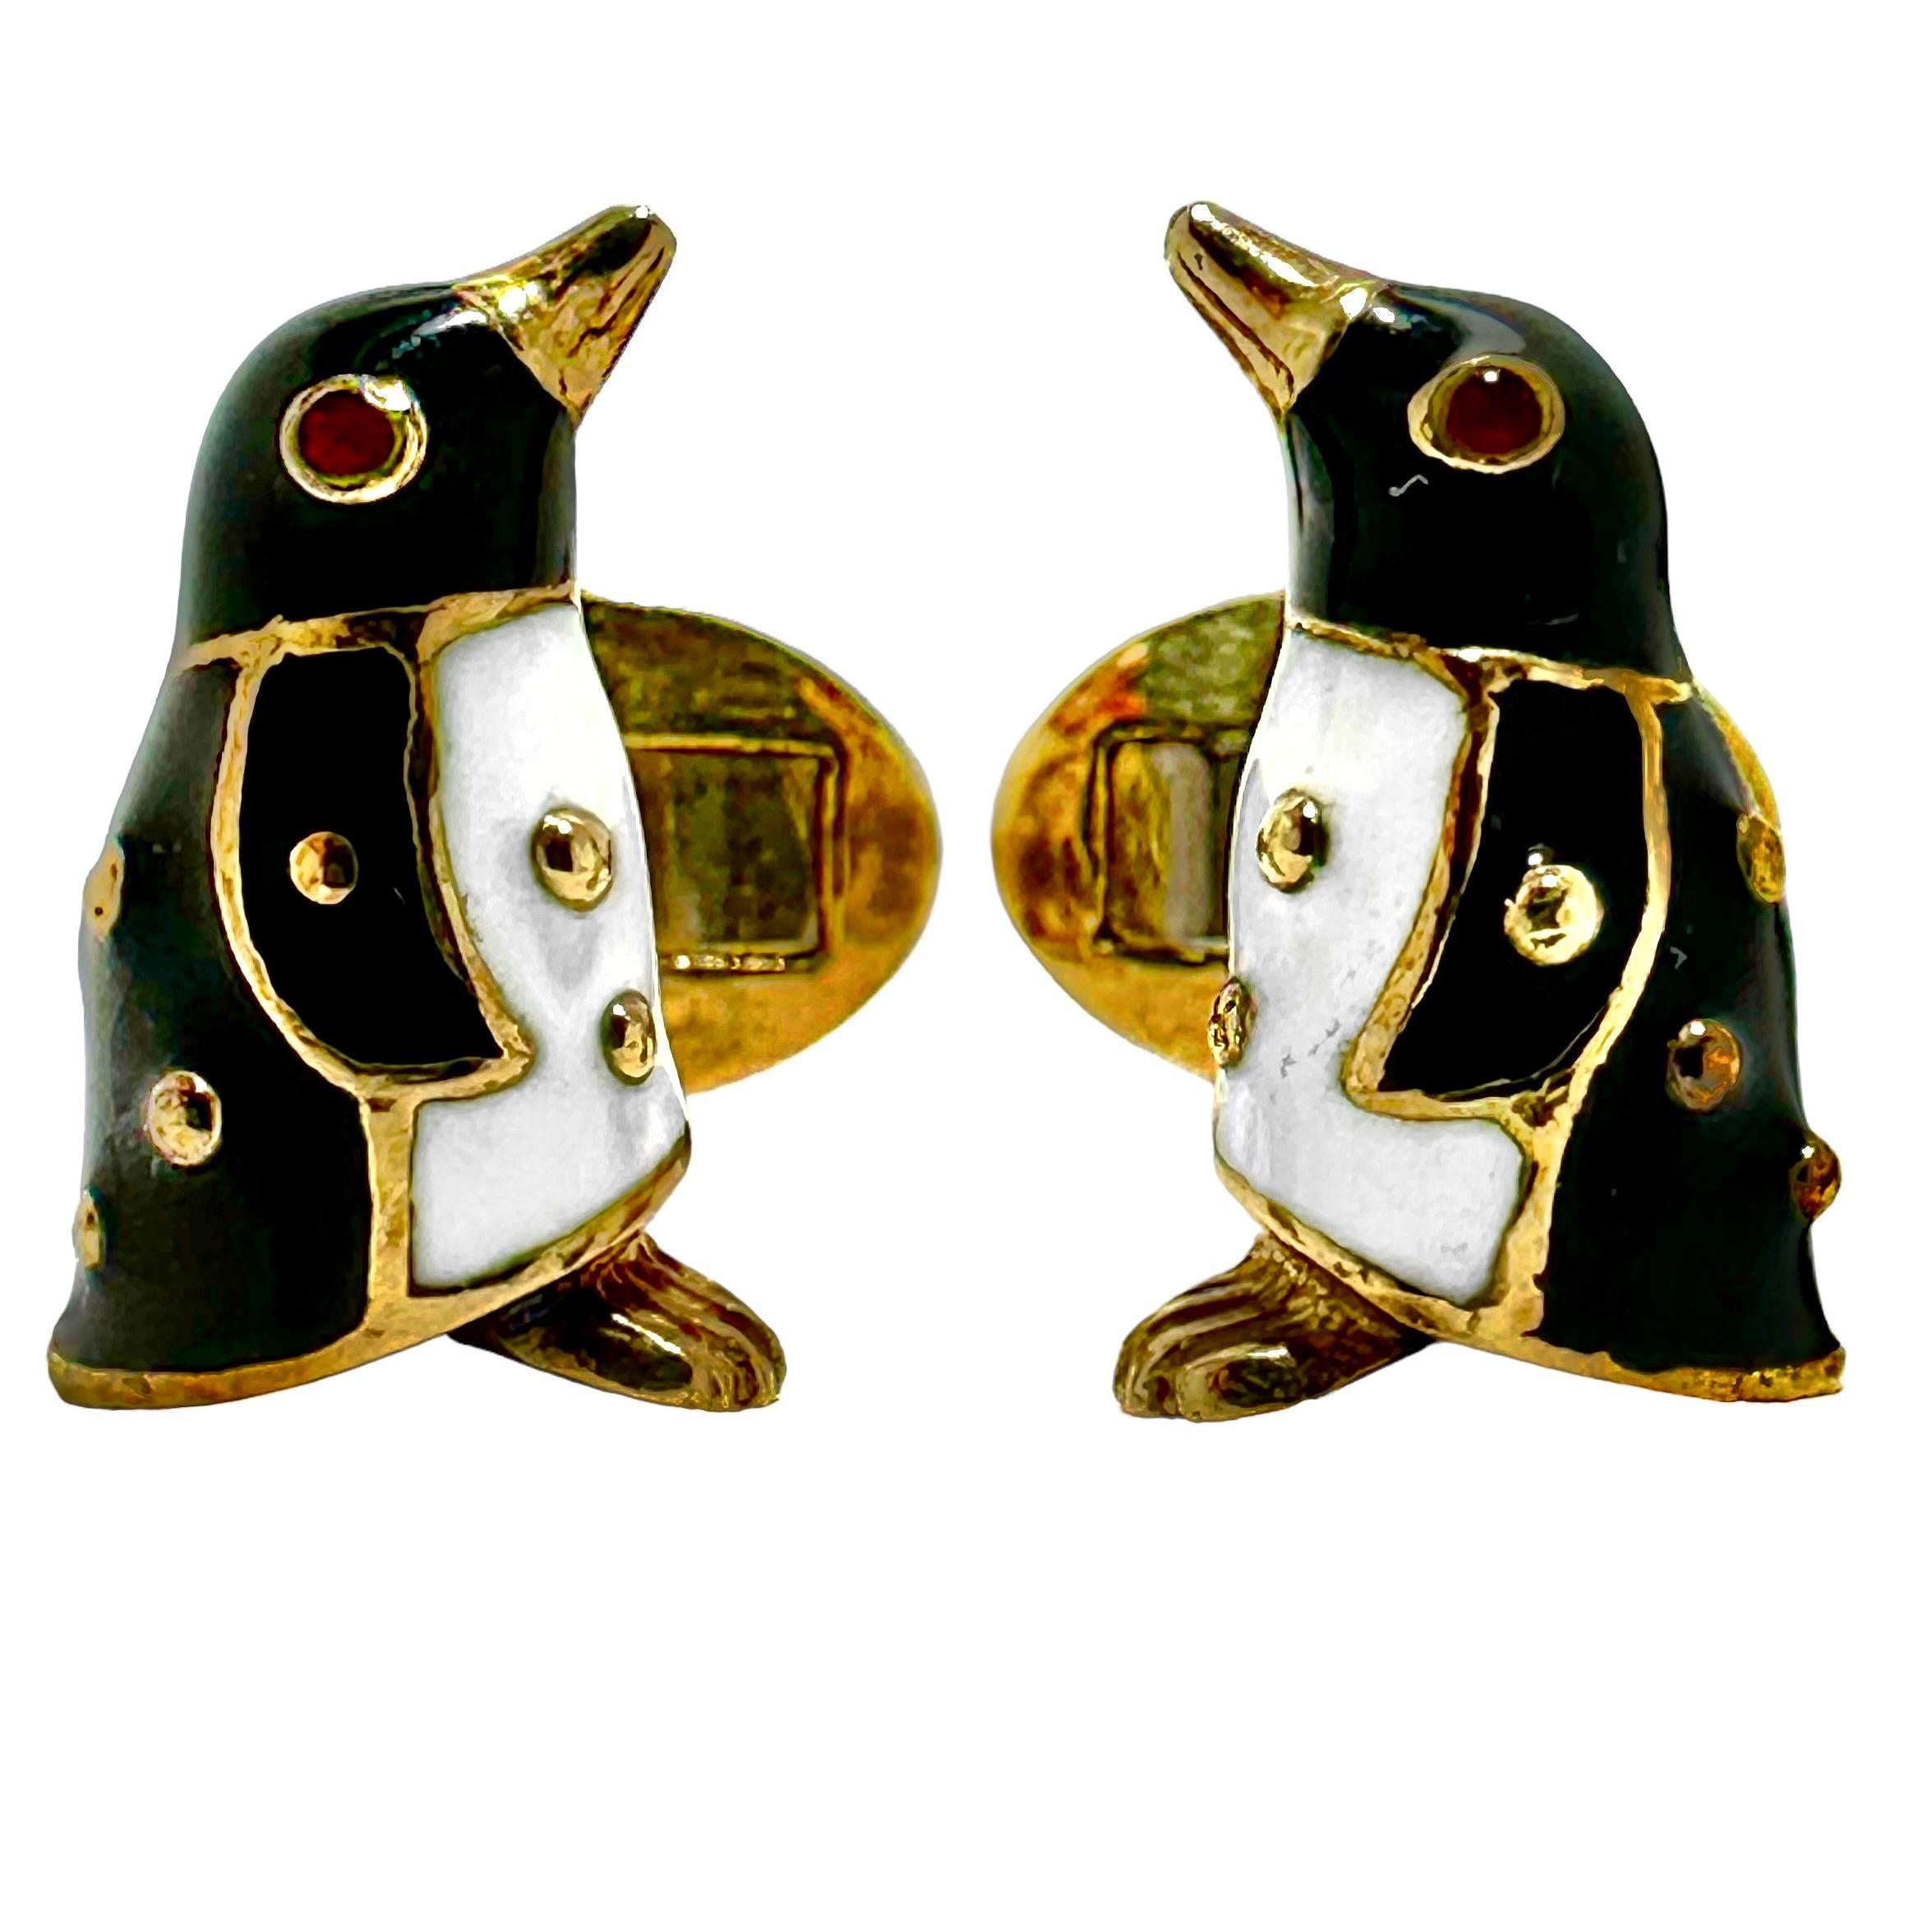 Whimsical 18K Gold & Enamel Four Button Penguin Dress Set by Designer Hidalgo  In Good Condition For Sale In Palm Beach, FL